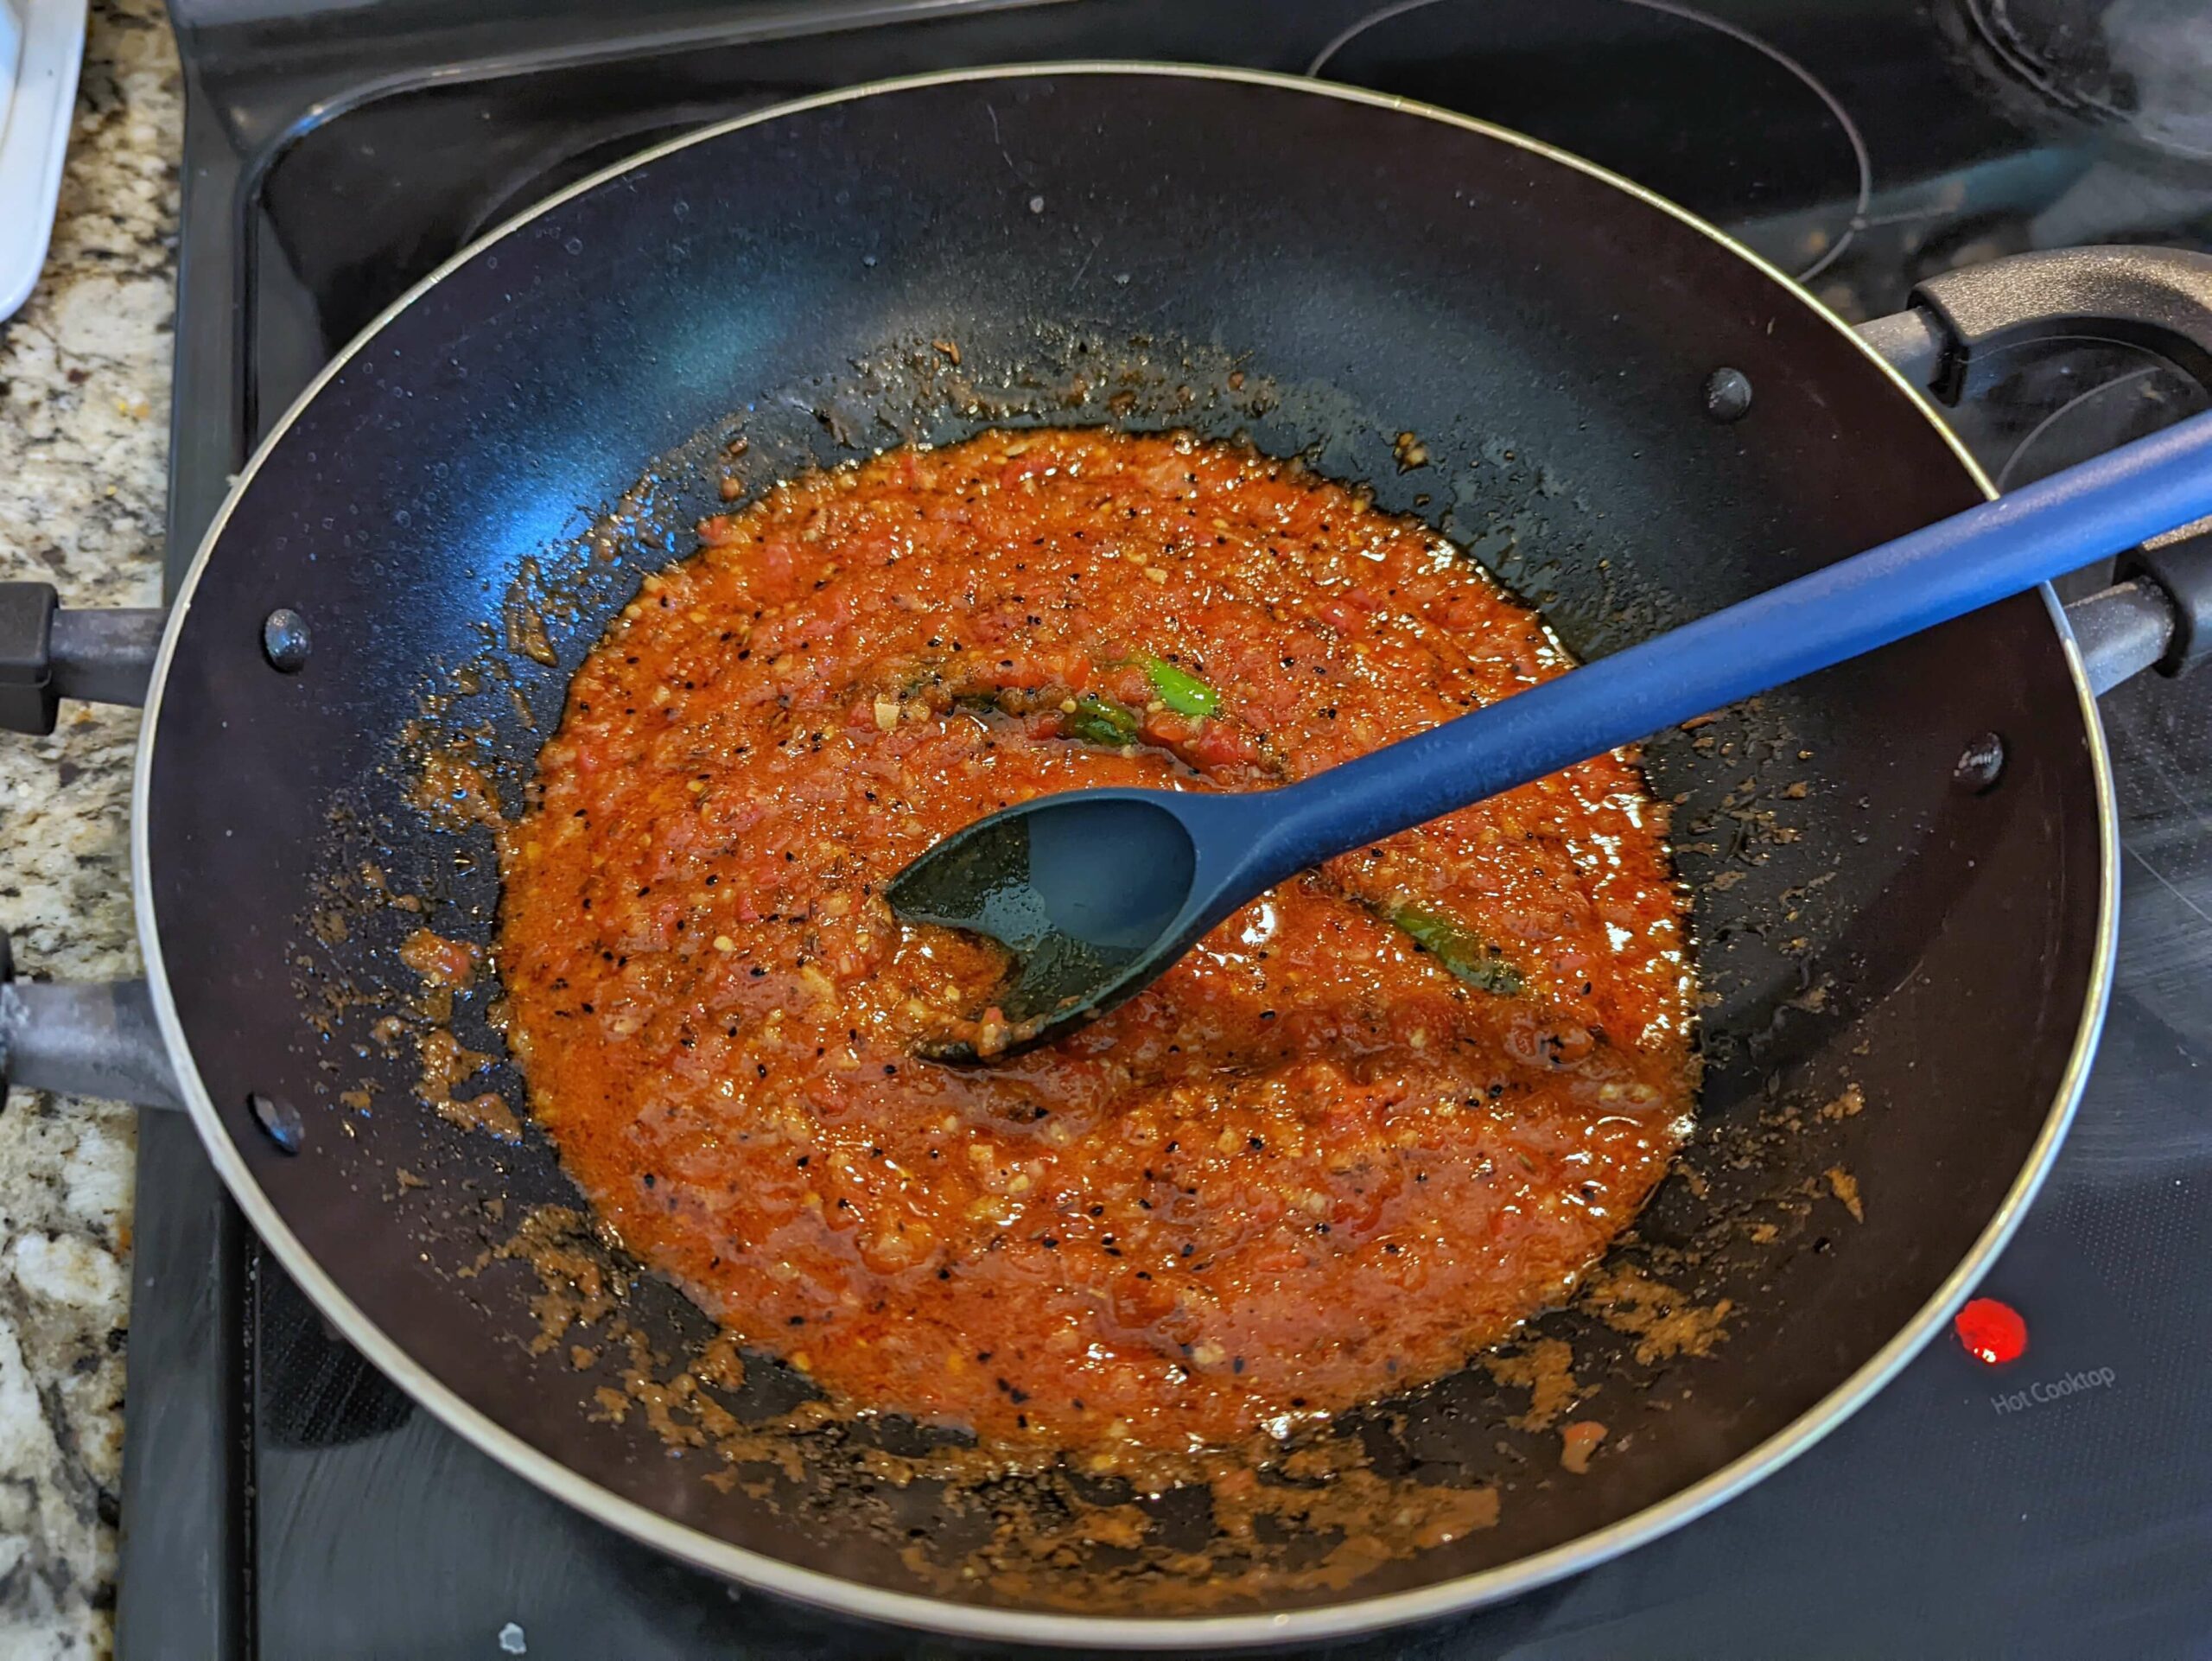 Add the spices and the tomatoes puree to the ginger and garlic mixture.